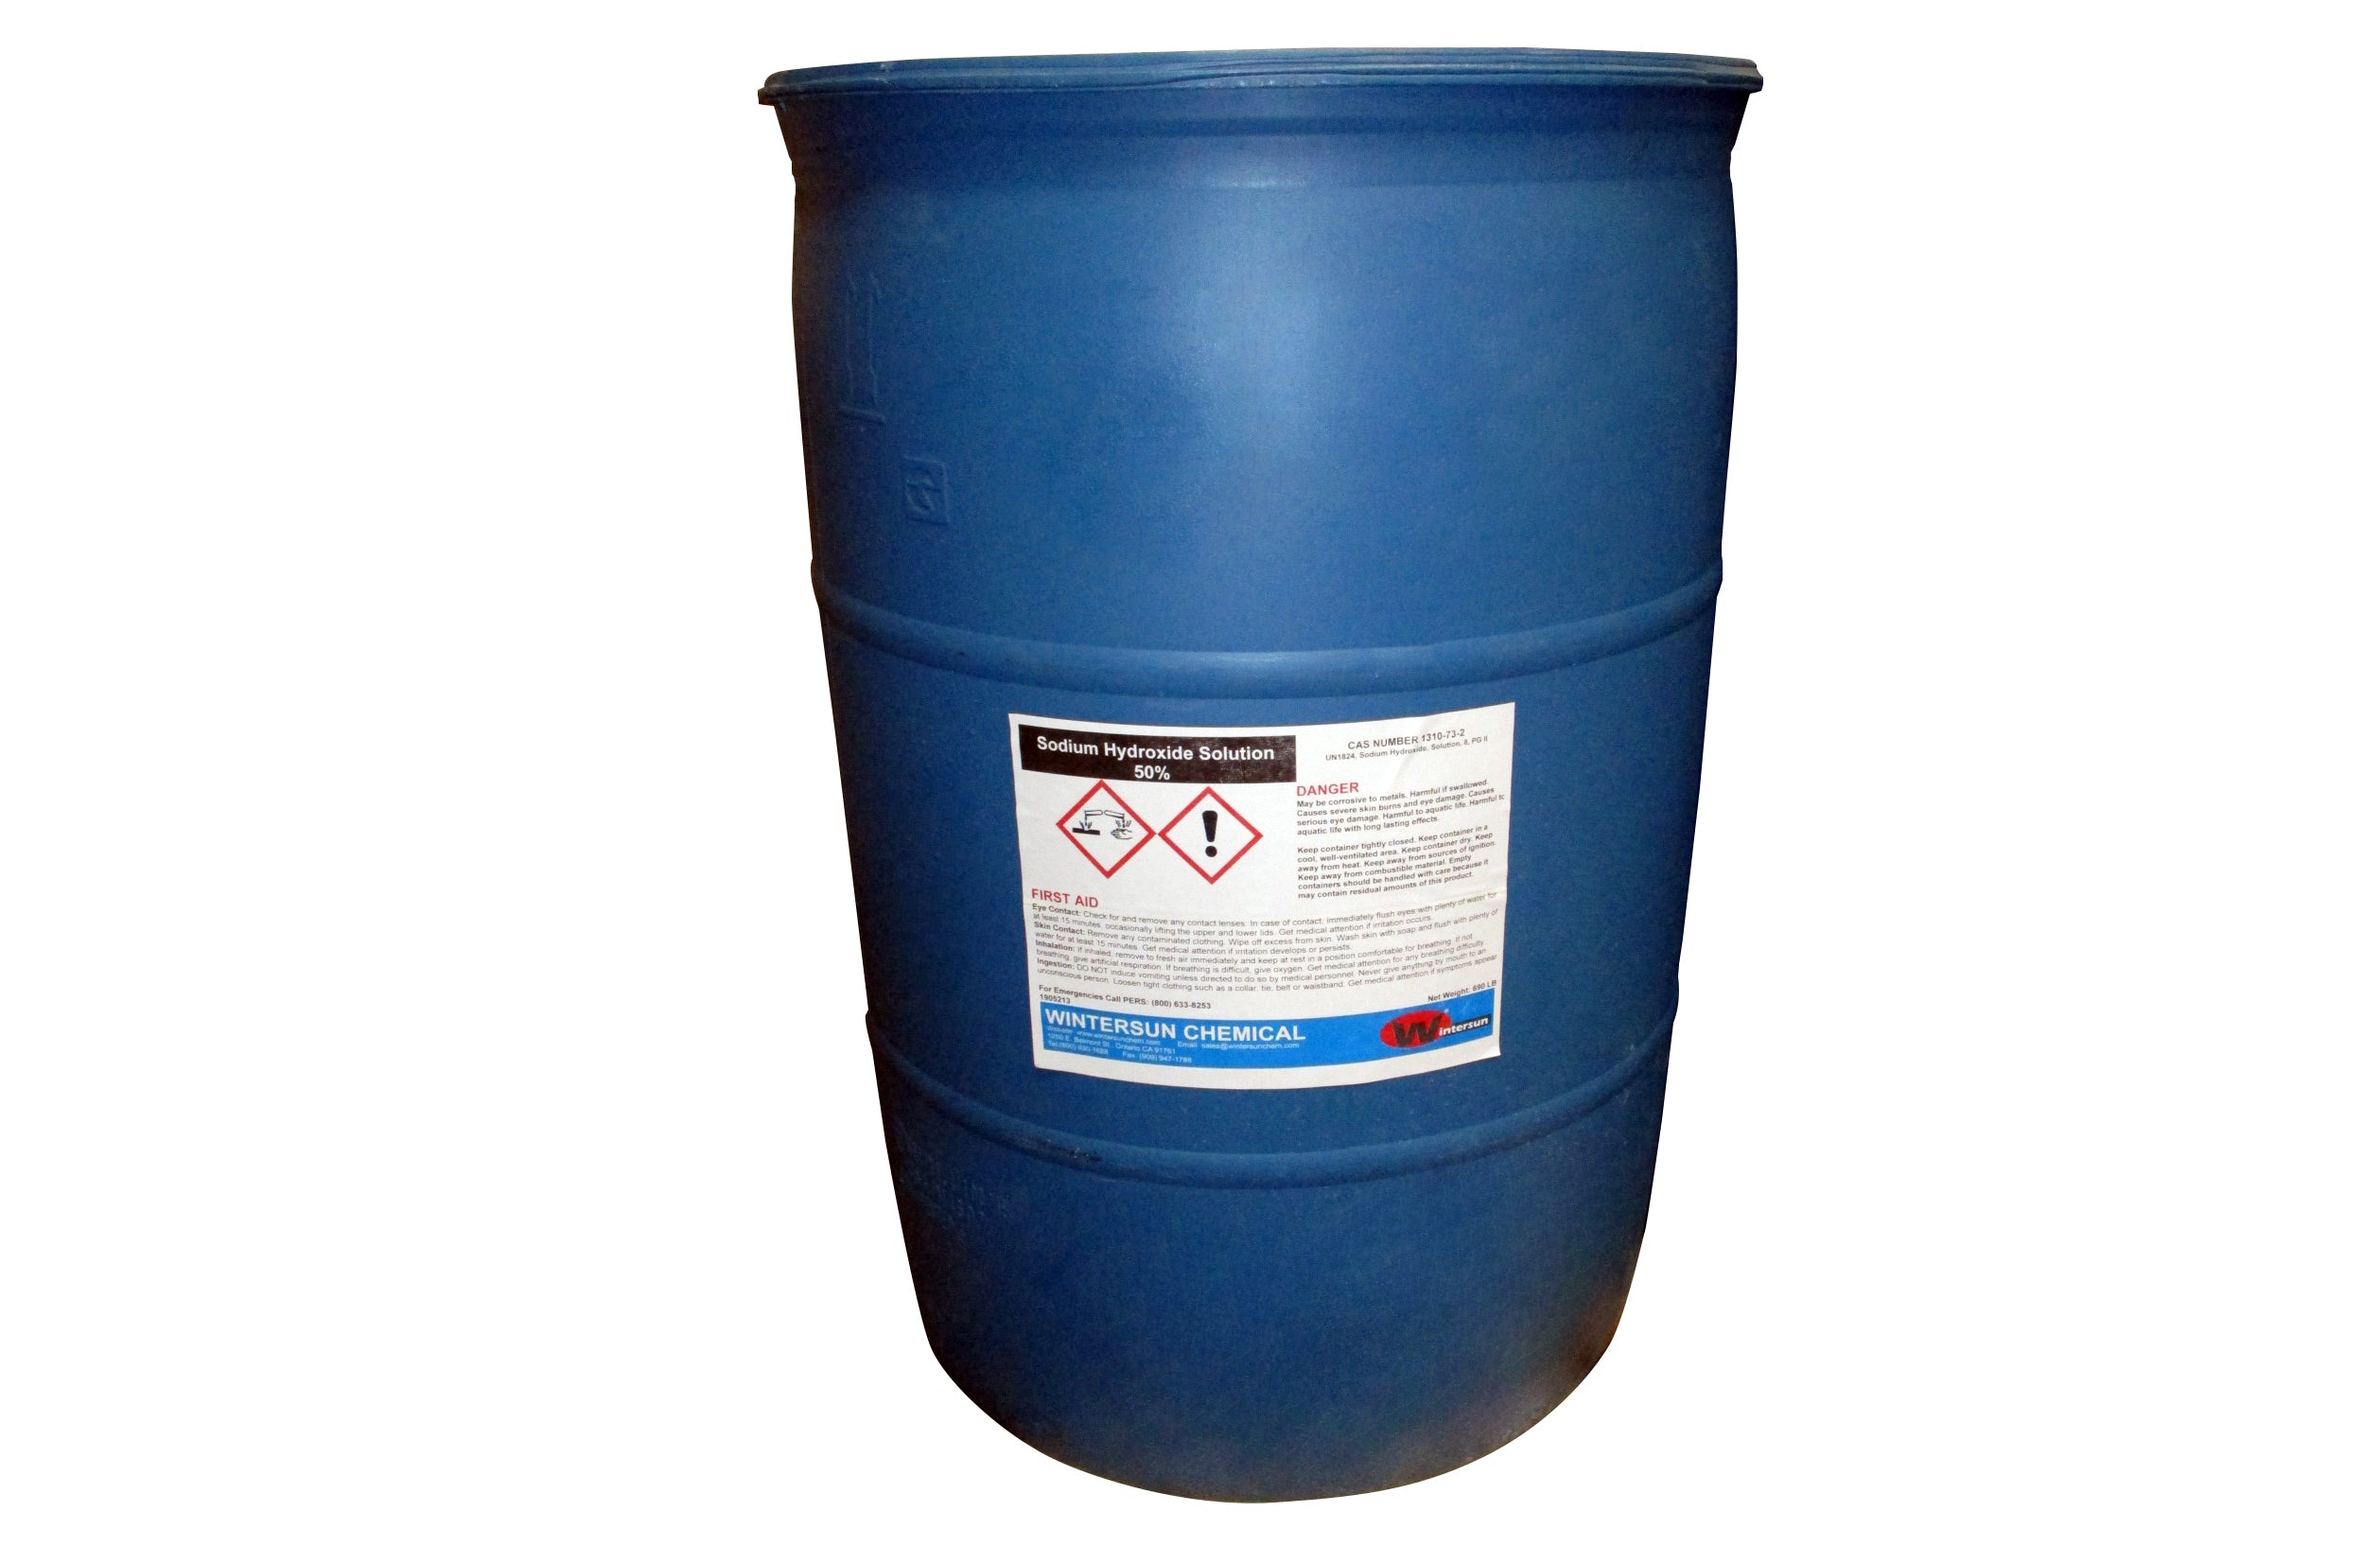 Chemistry Made Easy: Find Wholesale Food Grade Sodium Hydroxide 